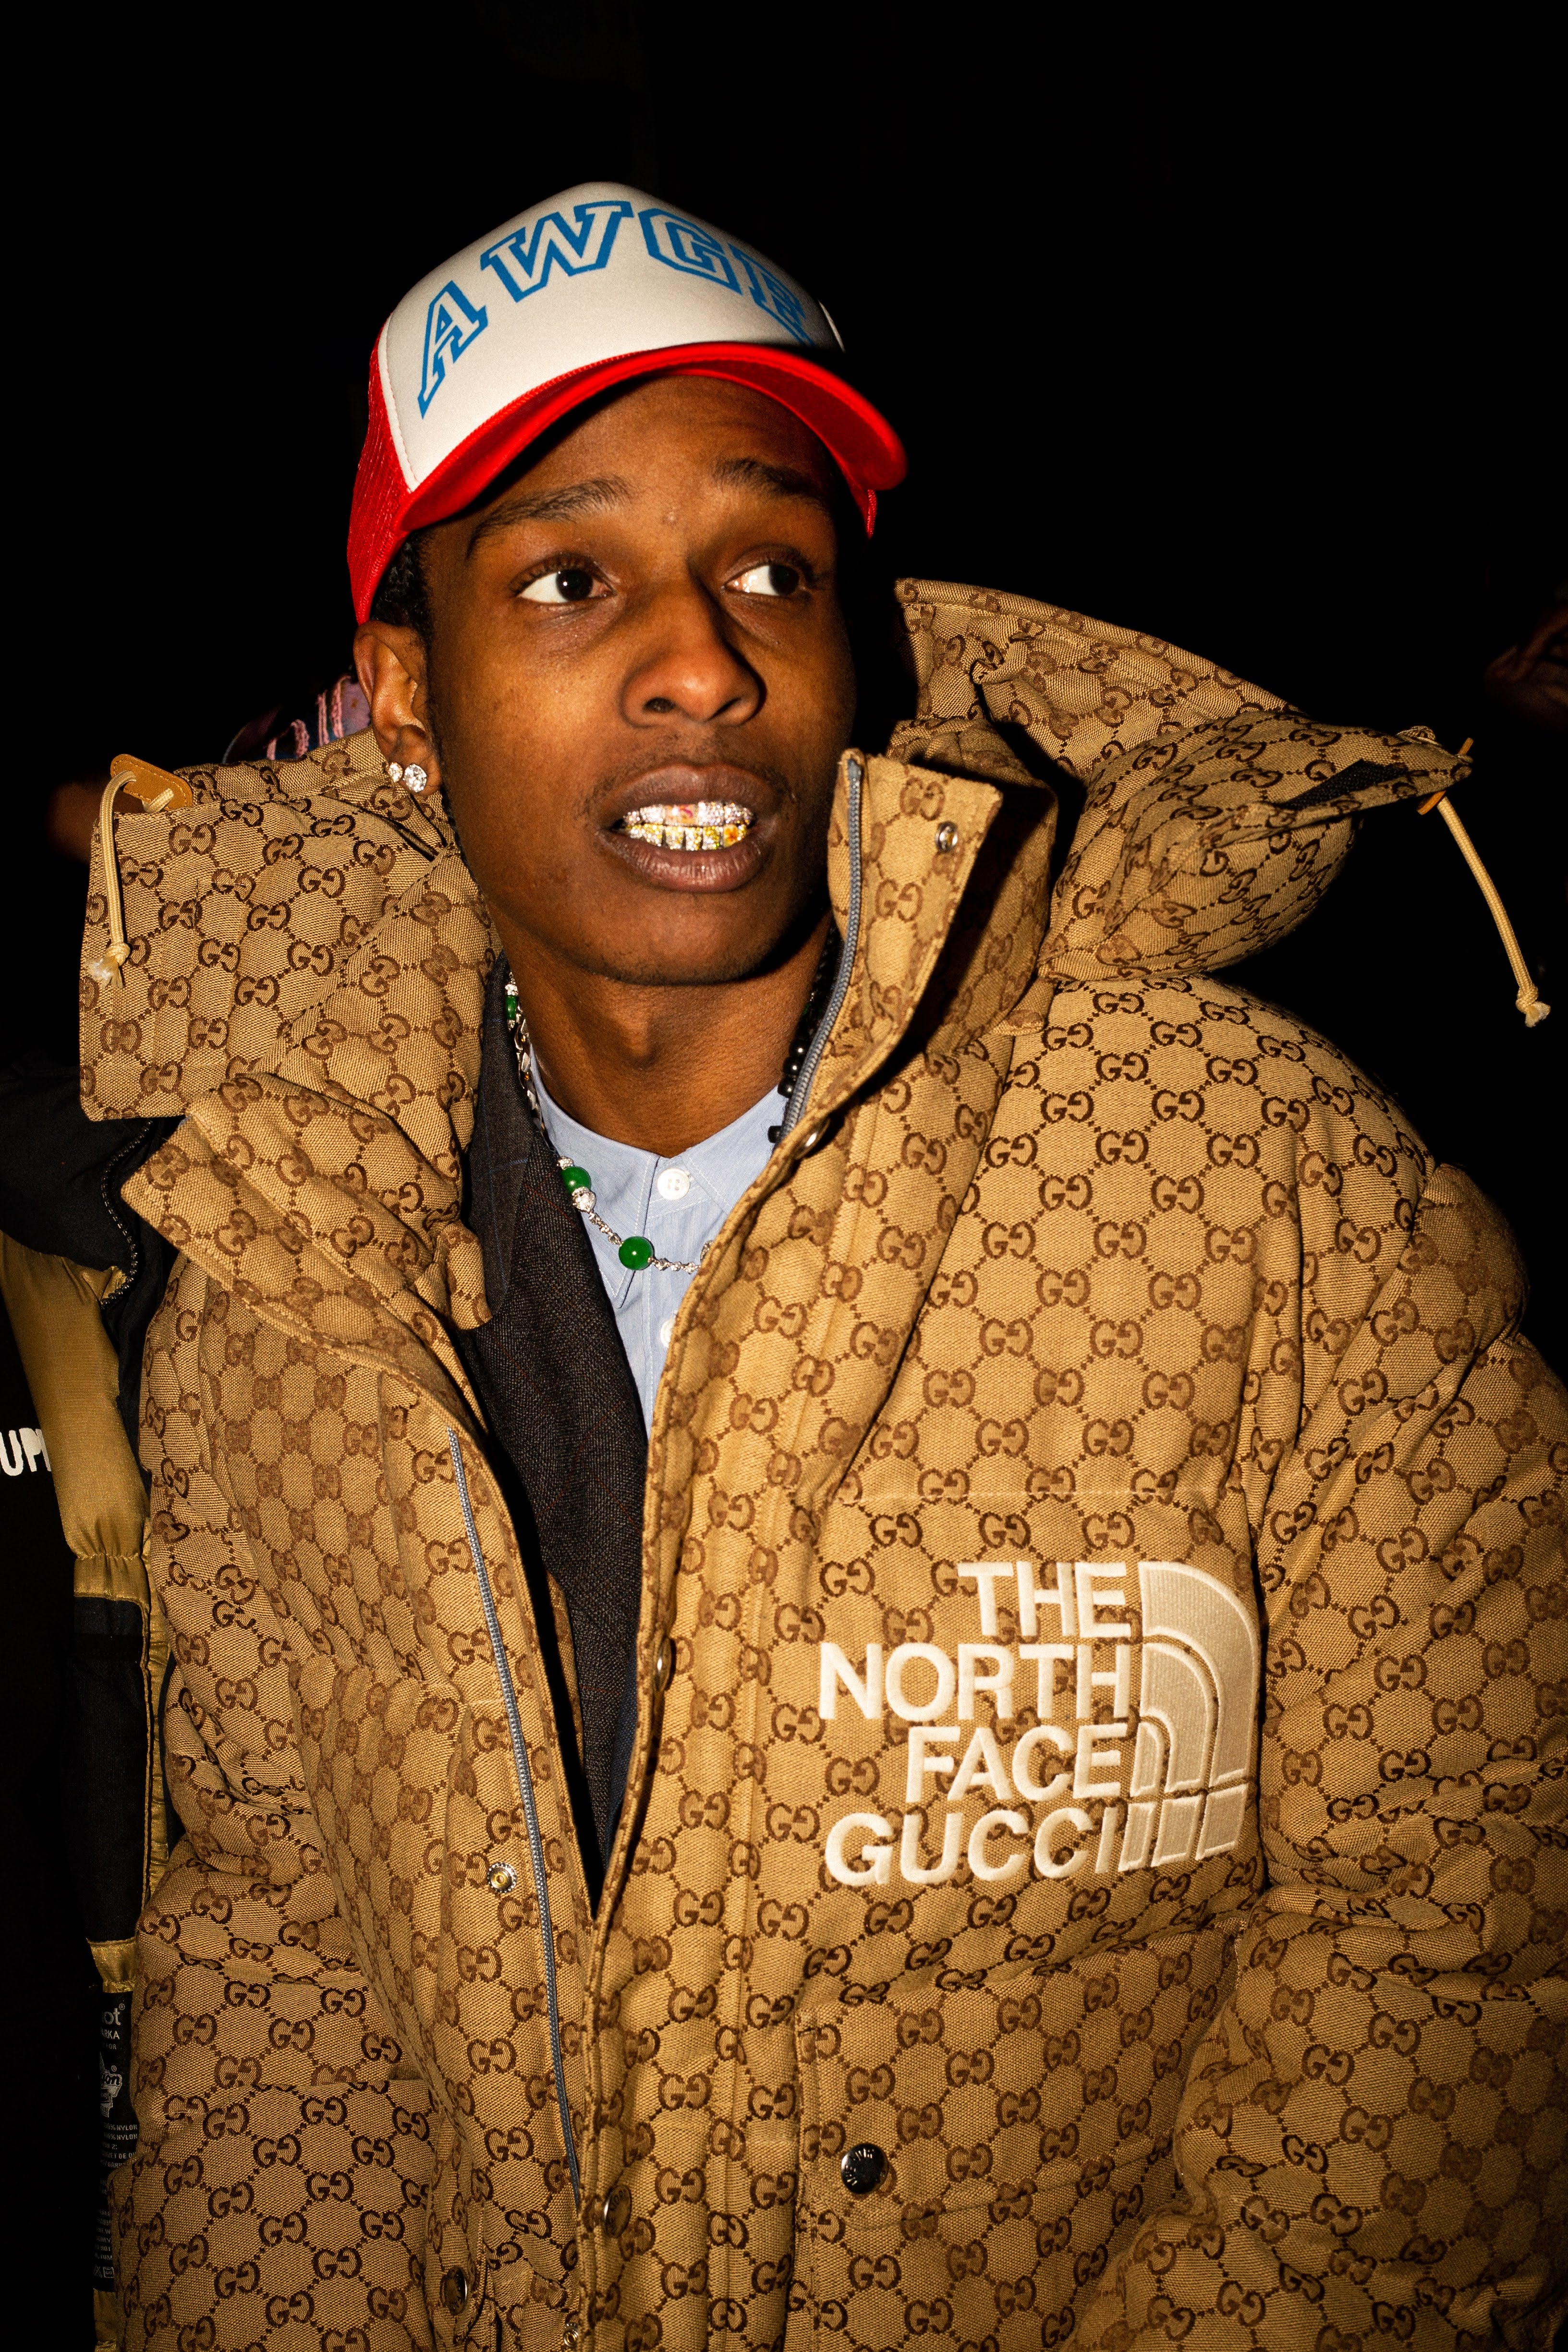 New Gucci The North Face Jacket